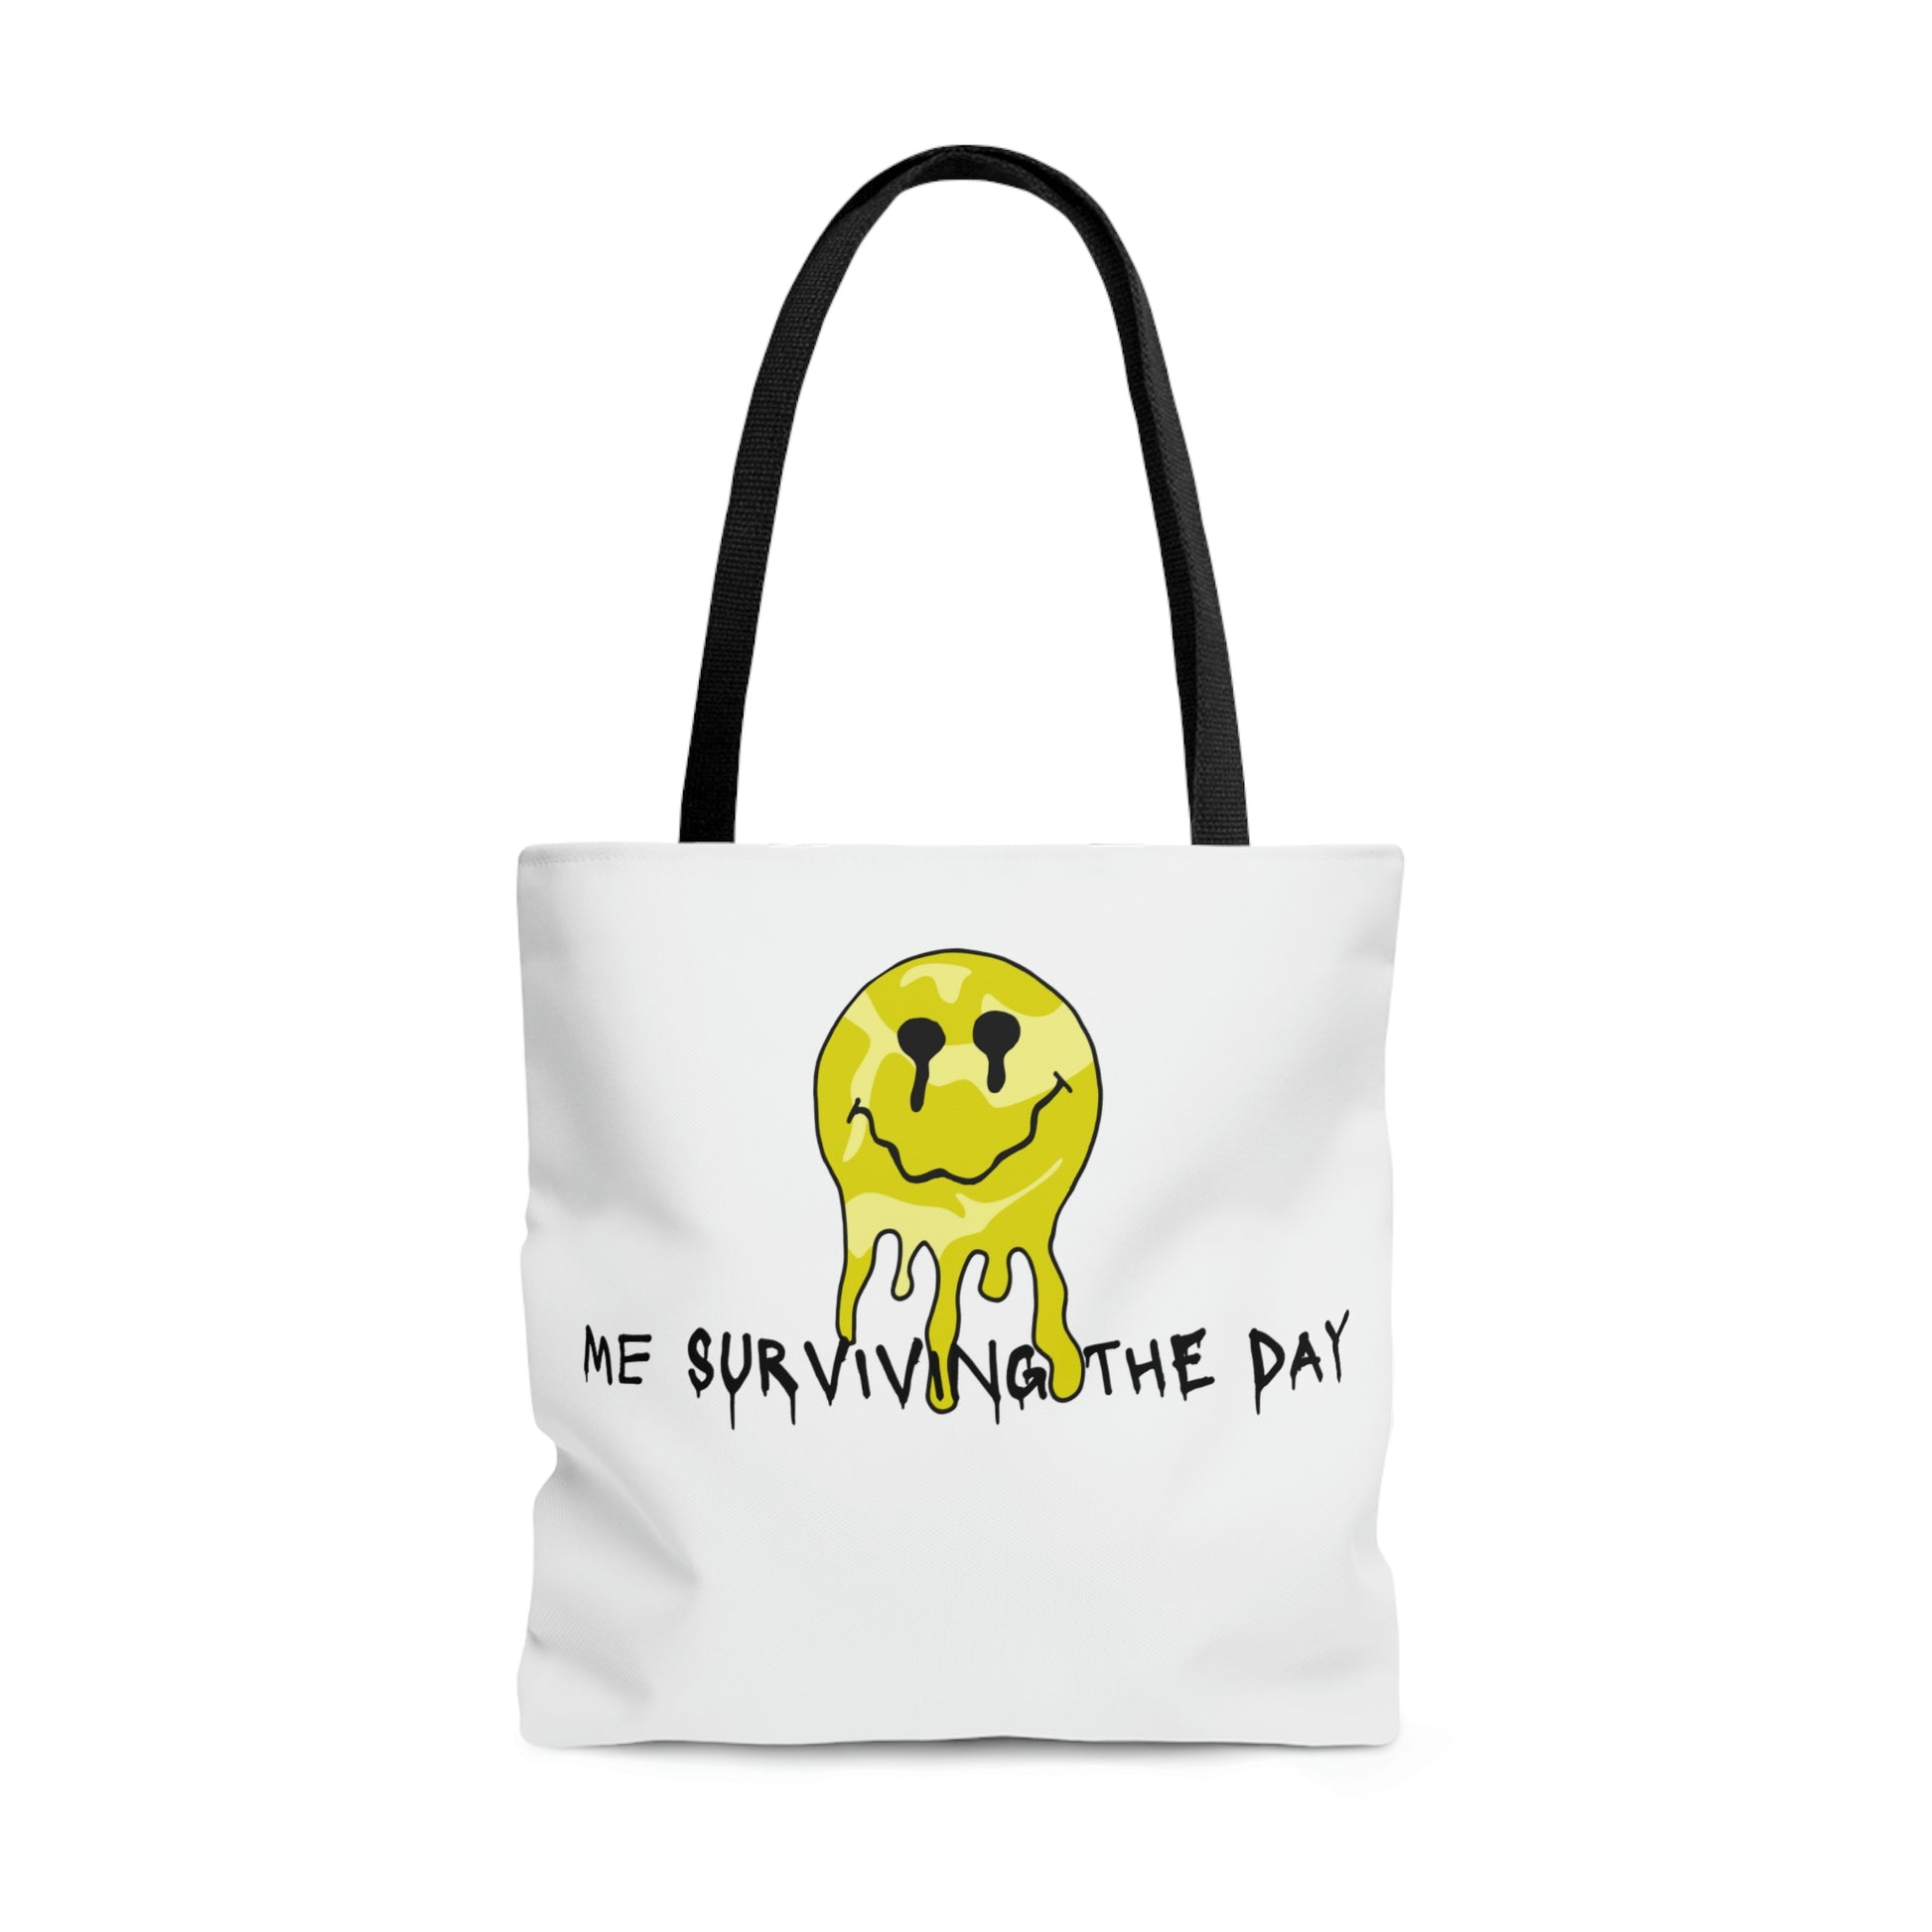 Me Surviving The Day Tote Bag | BKLA | shoes & accessories | backpack, hat, phone cover, tote bags, clutch bags